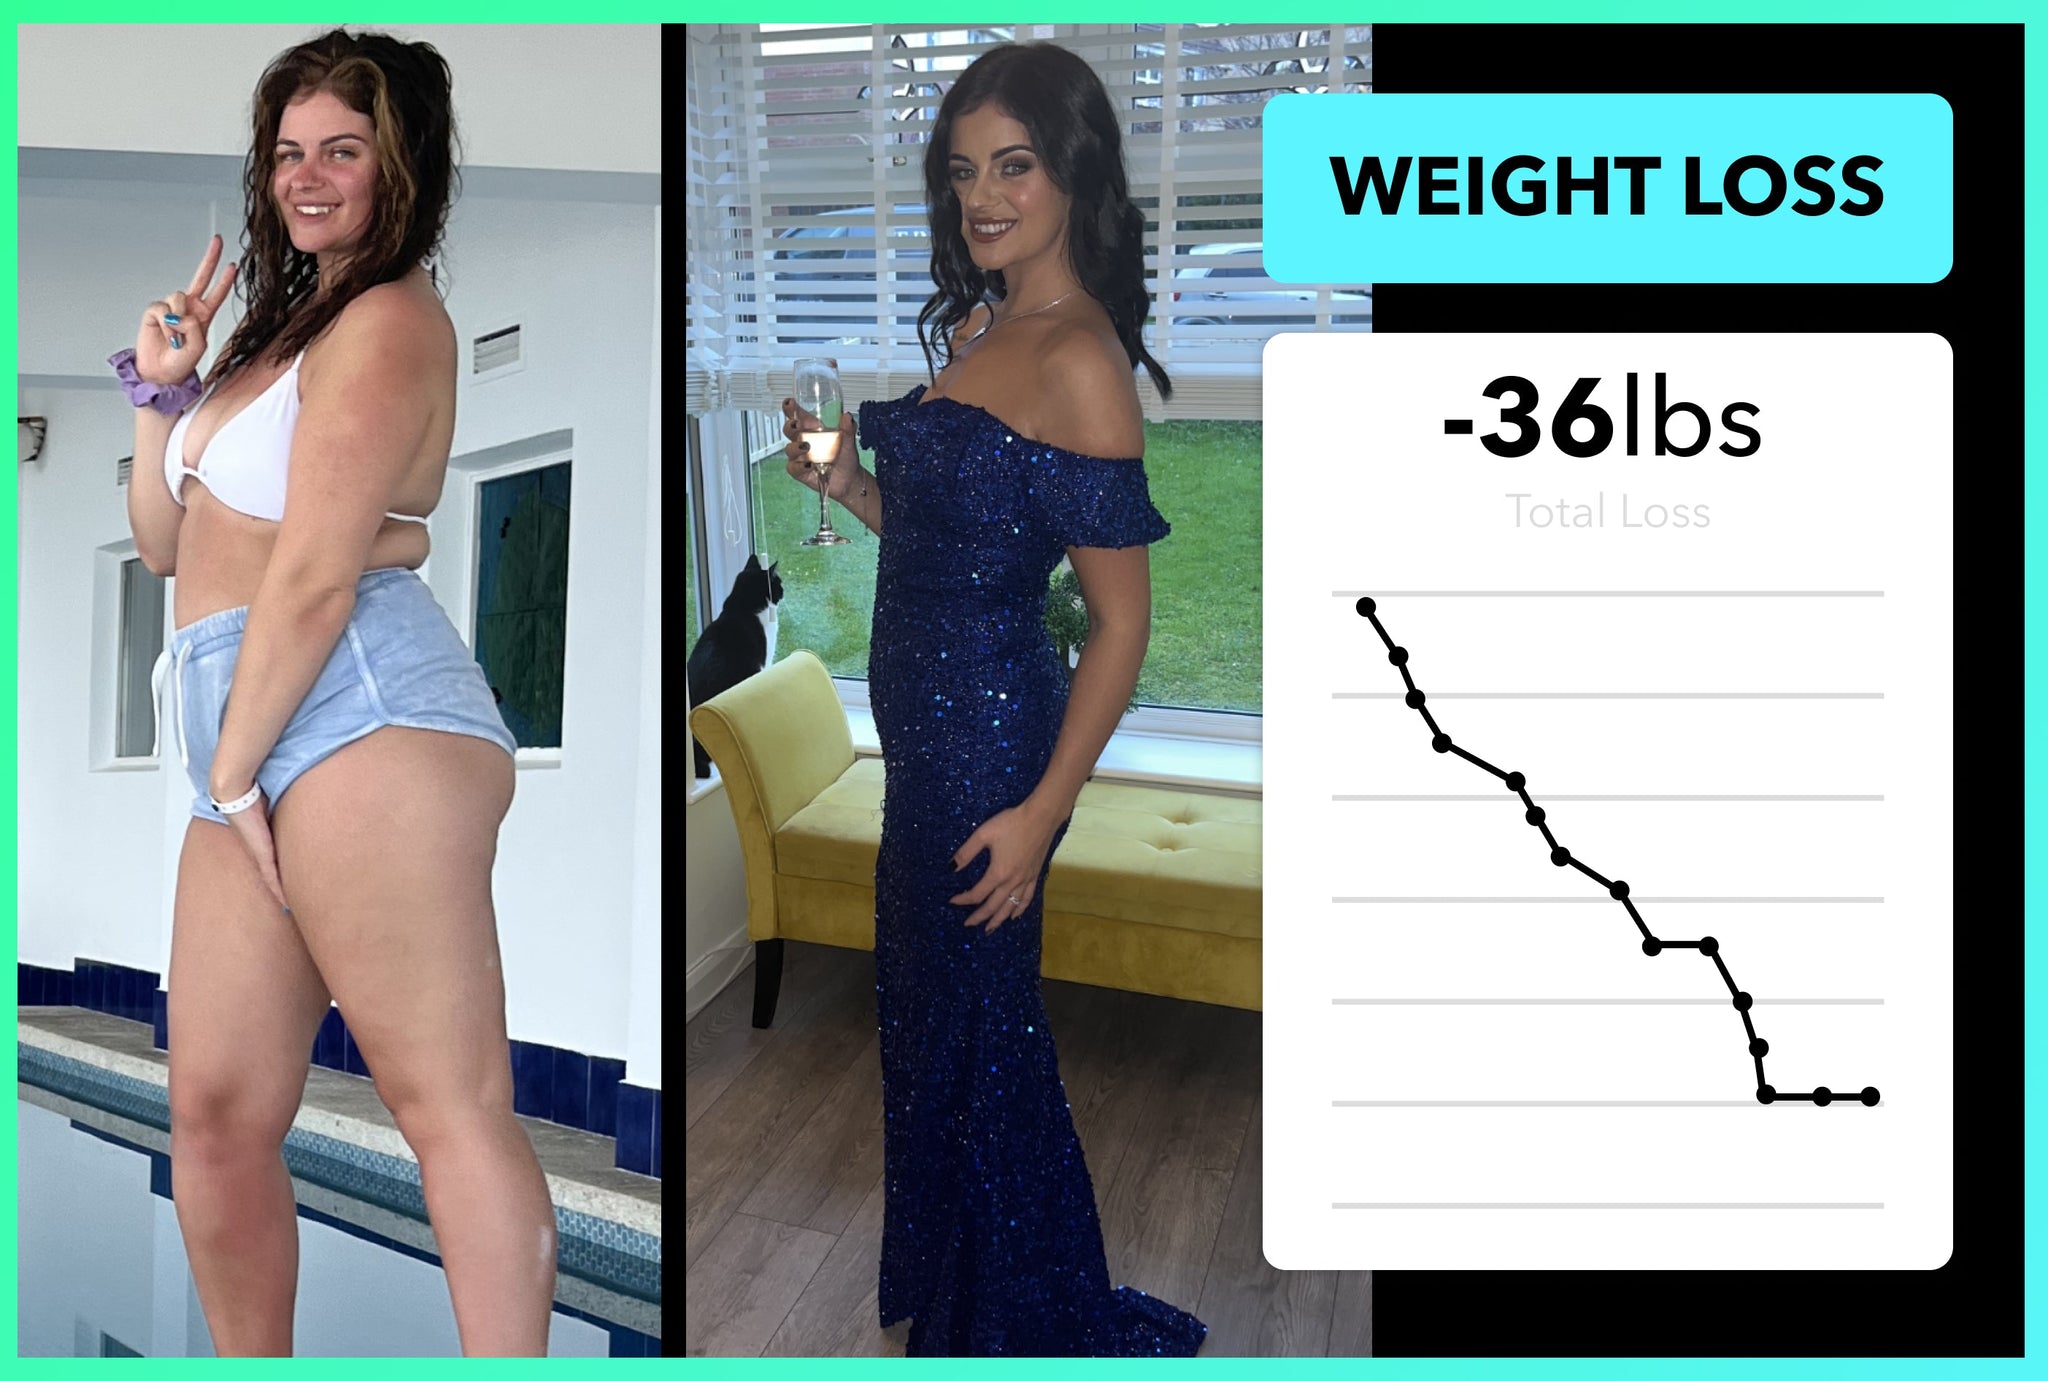 How Gemma lost 36lbs with Team RH